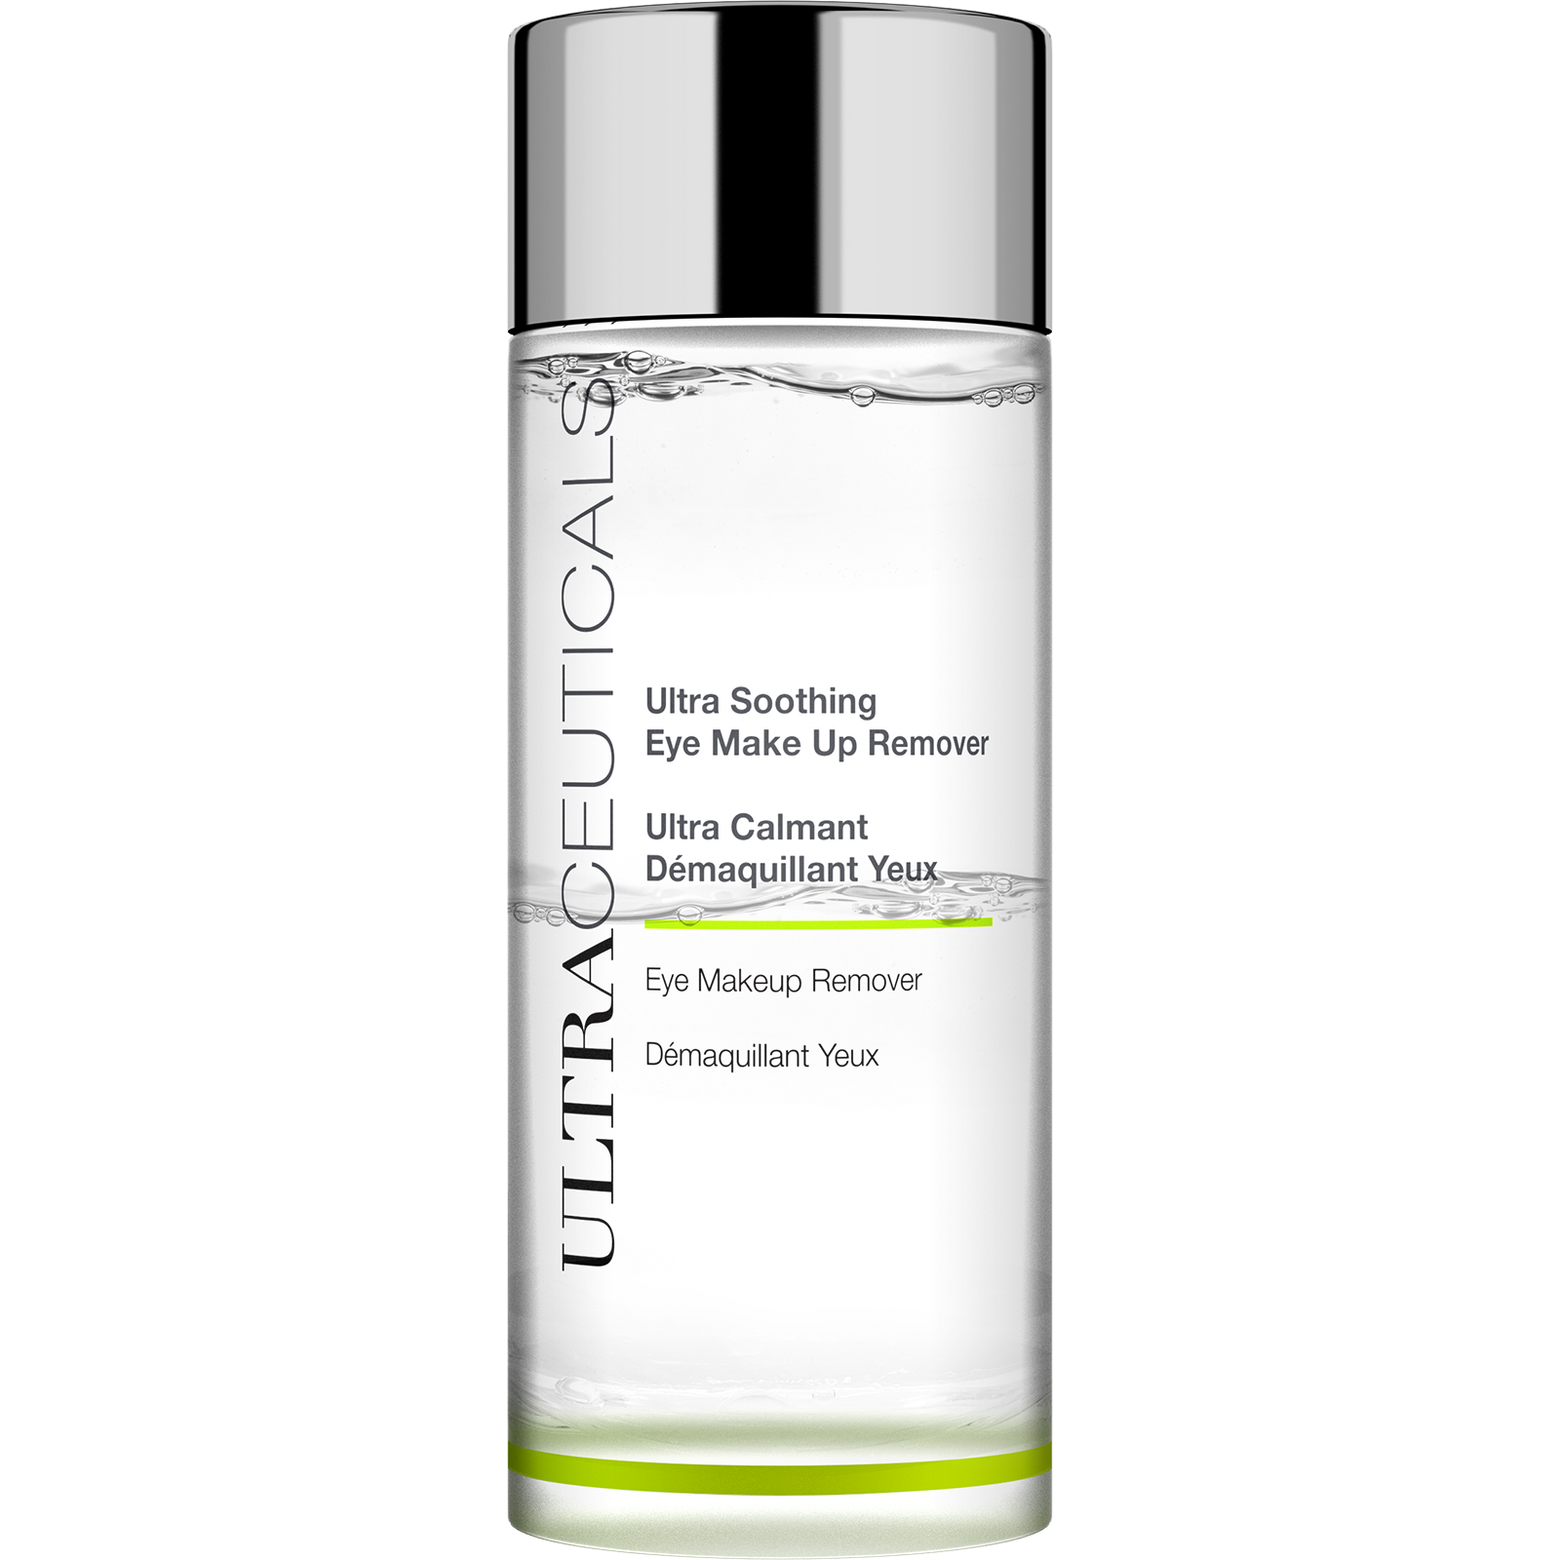 Ultra Soothing Eye Make-Up Remover